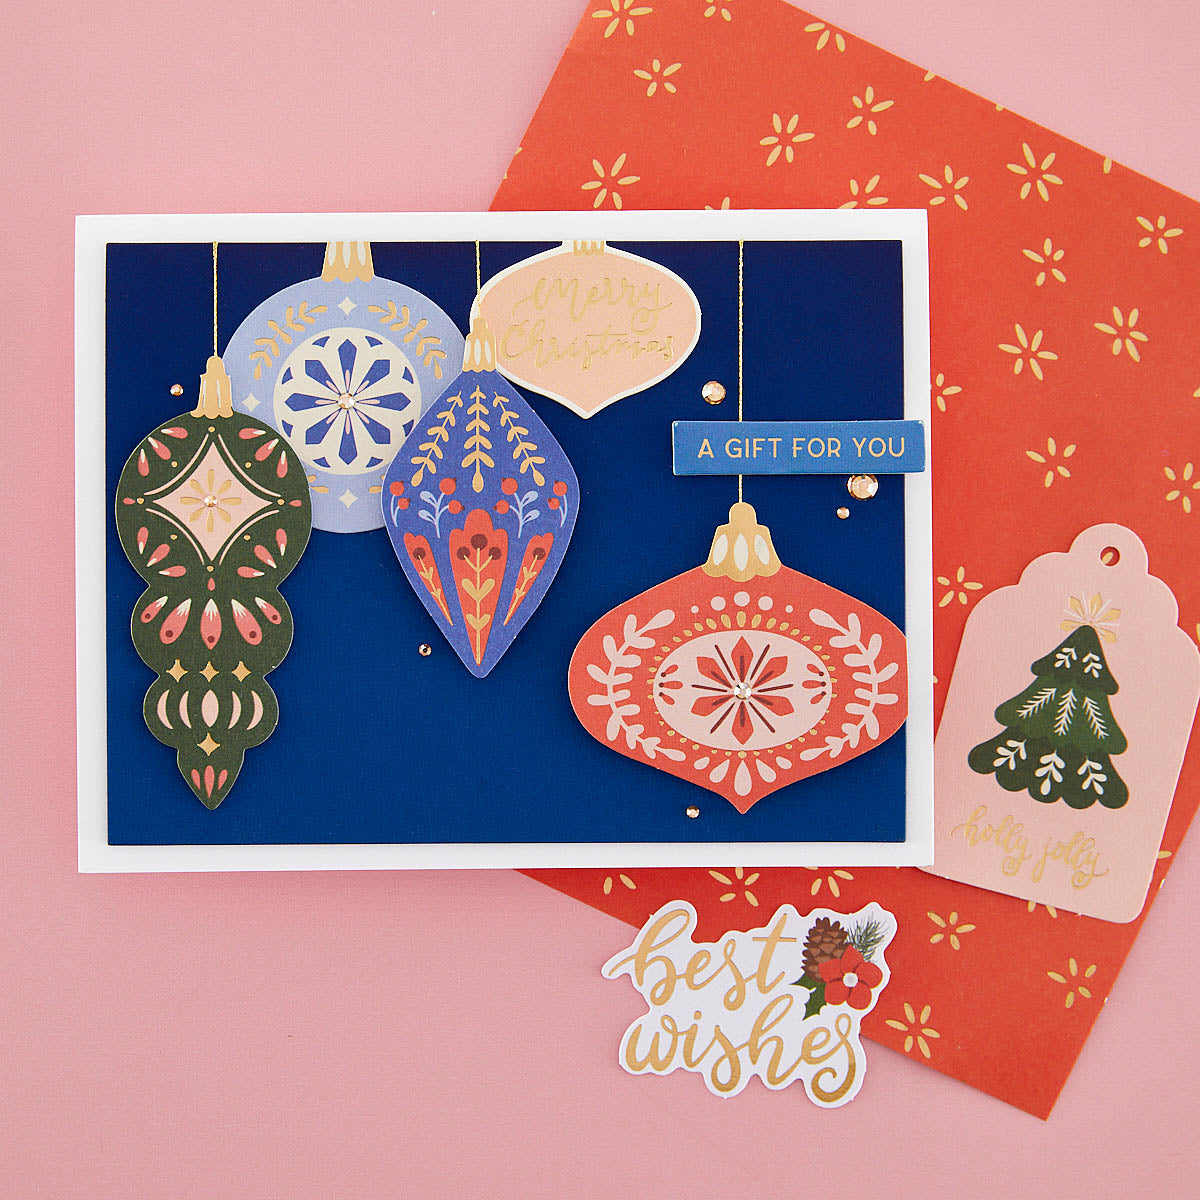 Nutcracker Ballet Printed Die Cuts from the Nutcracker Sweet Collectio